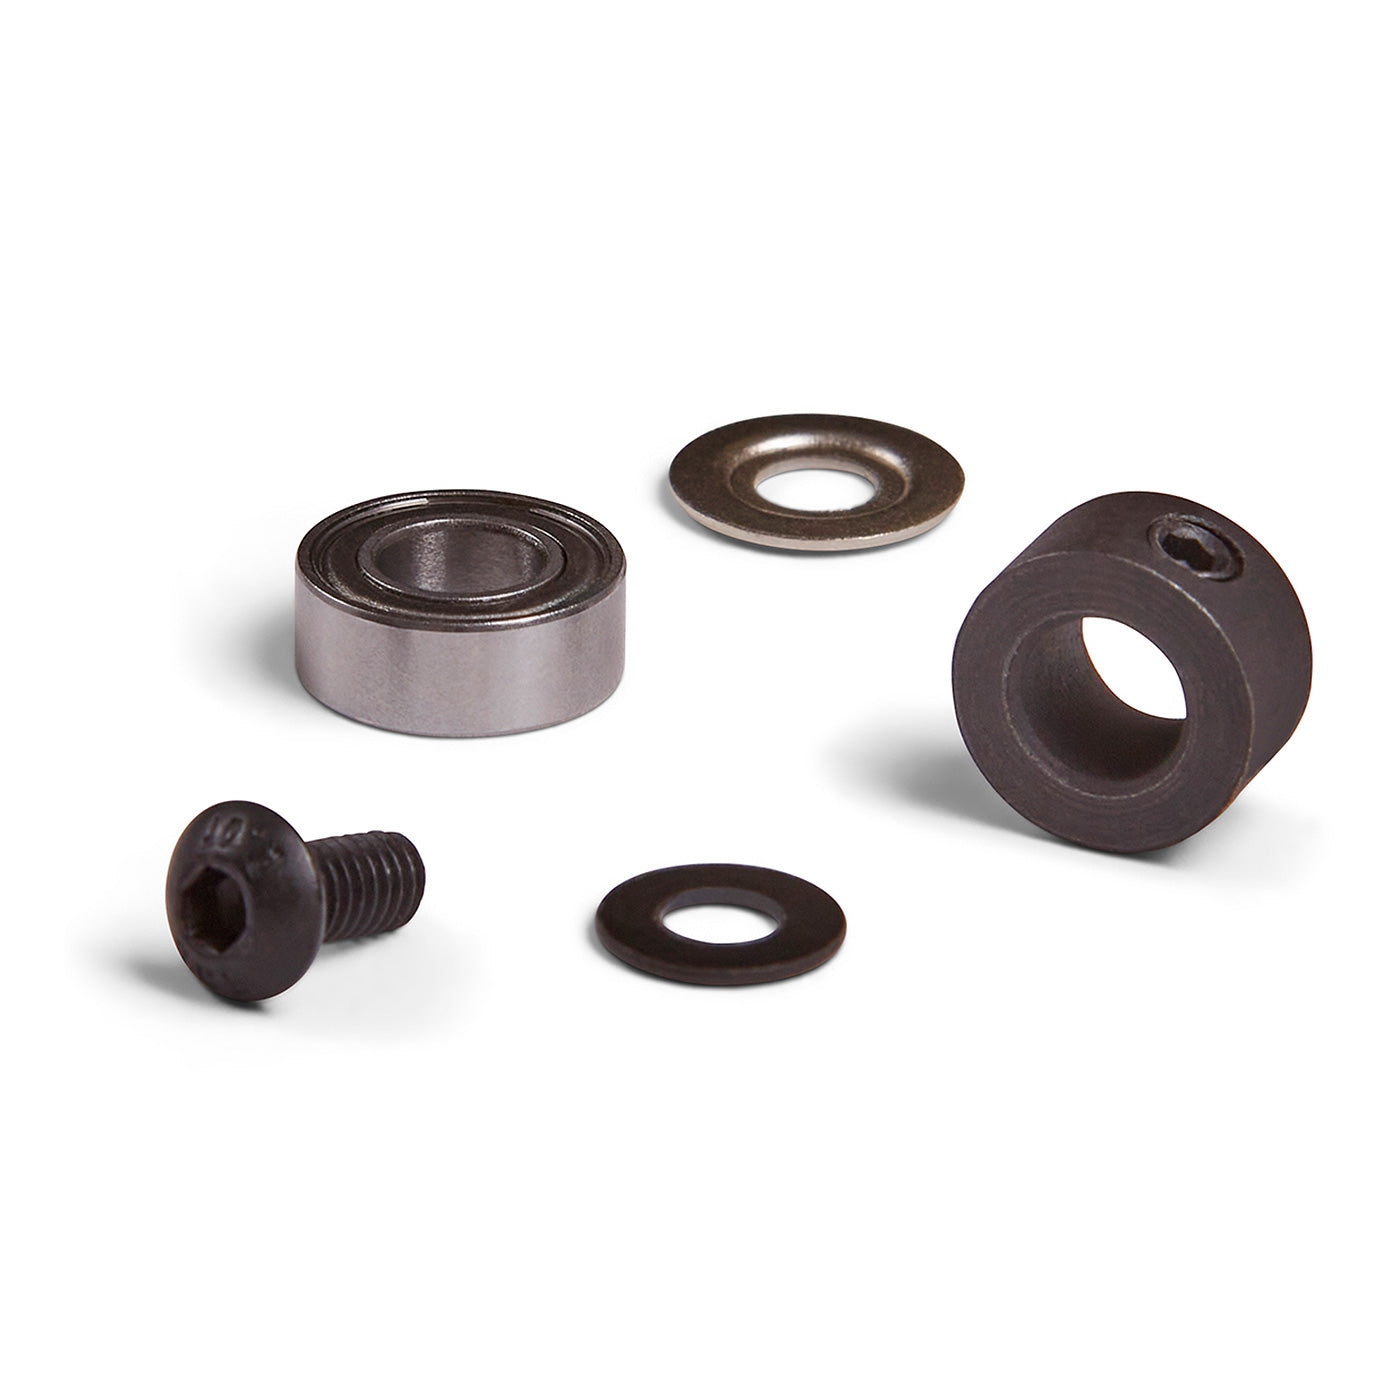 Bearing Kit for R5509, R5531, R5532, R5533, R5534, R5795, R5796, R5816 and R5867  